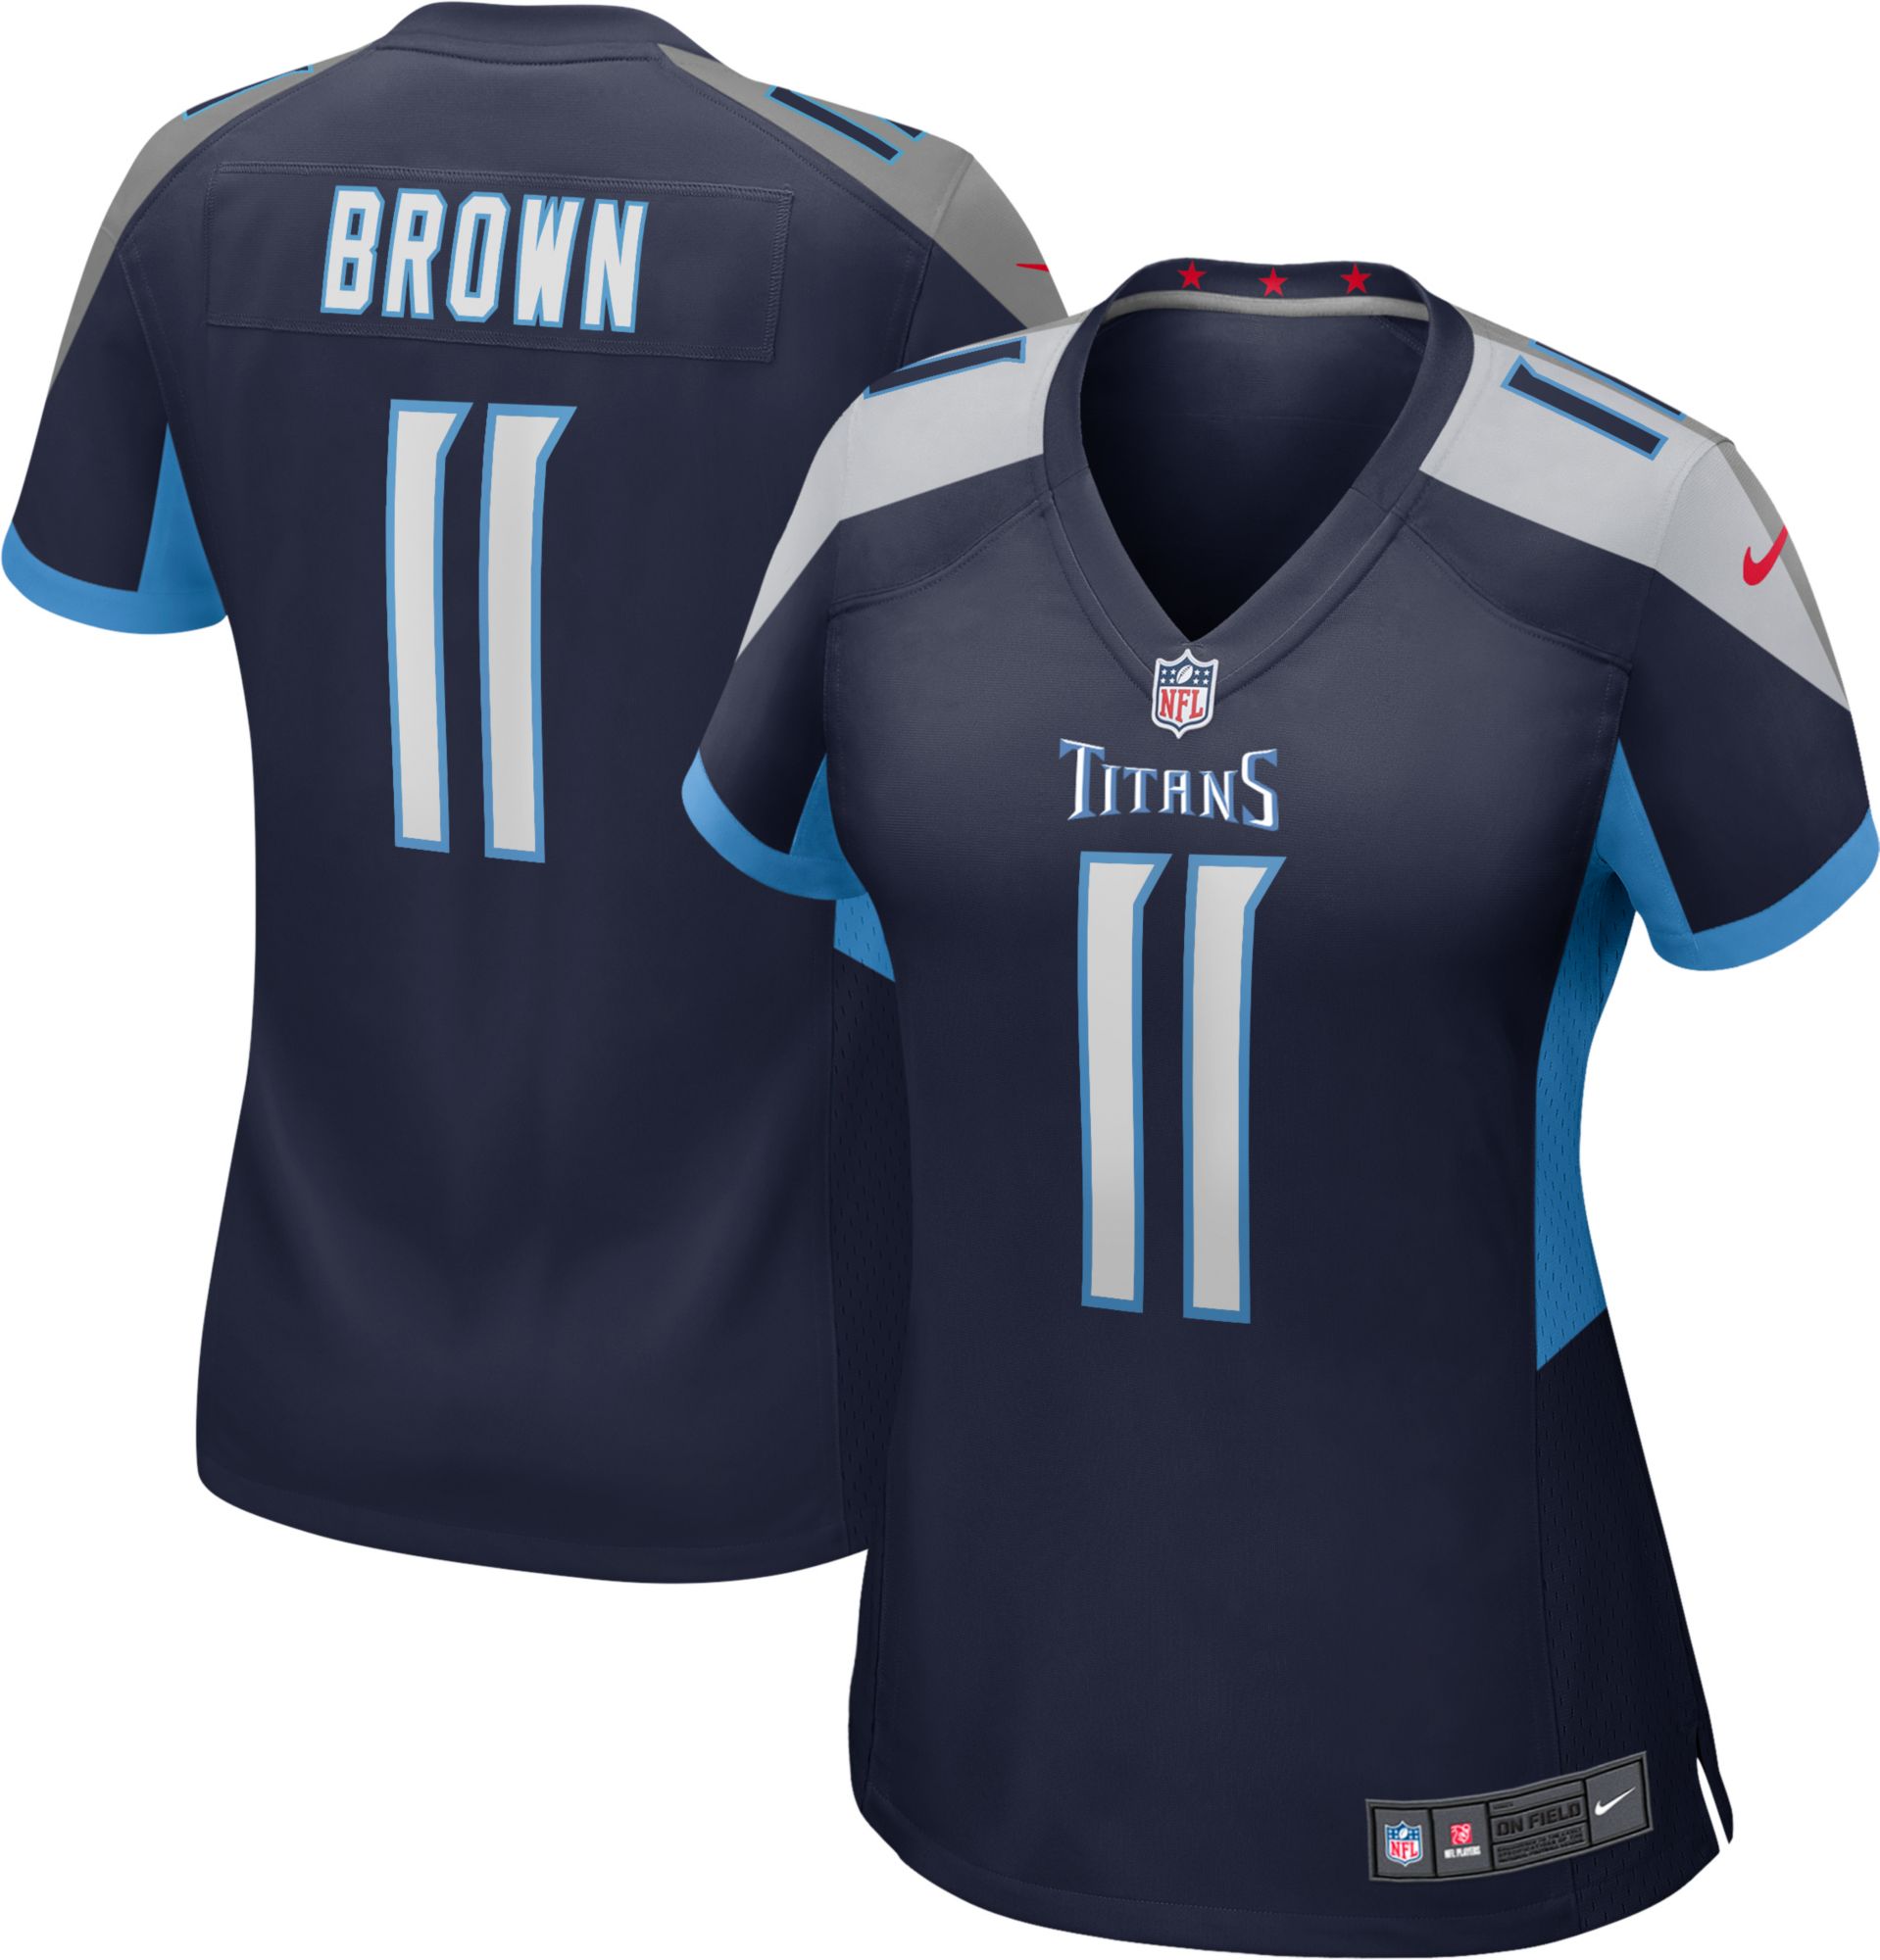 titans tennessee jersey